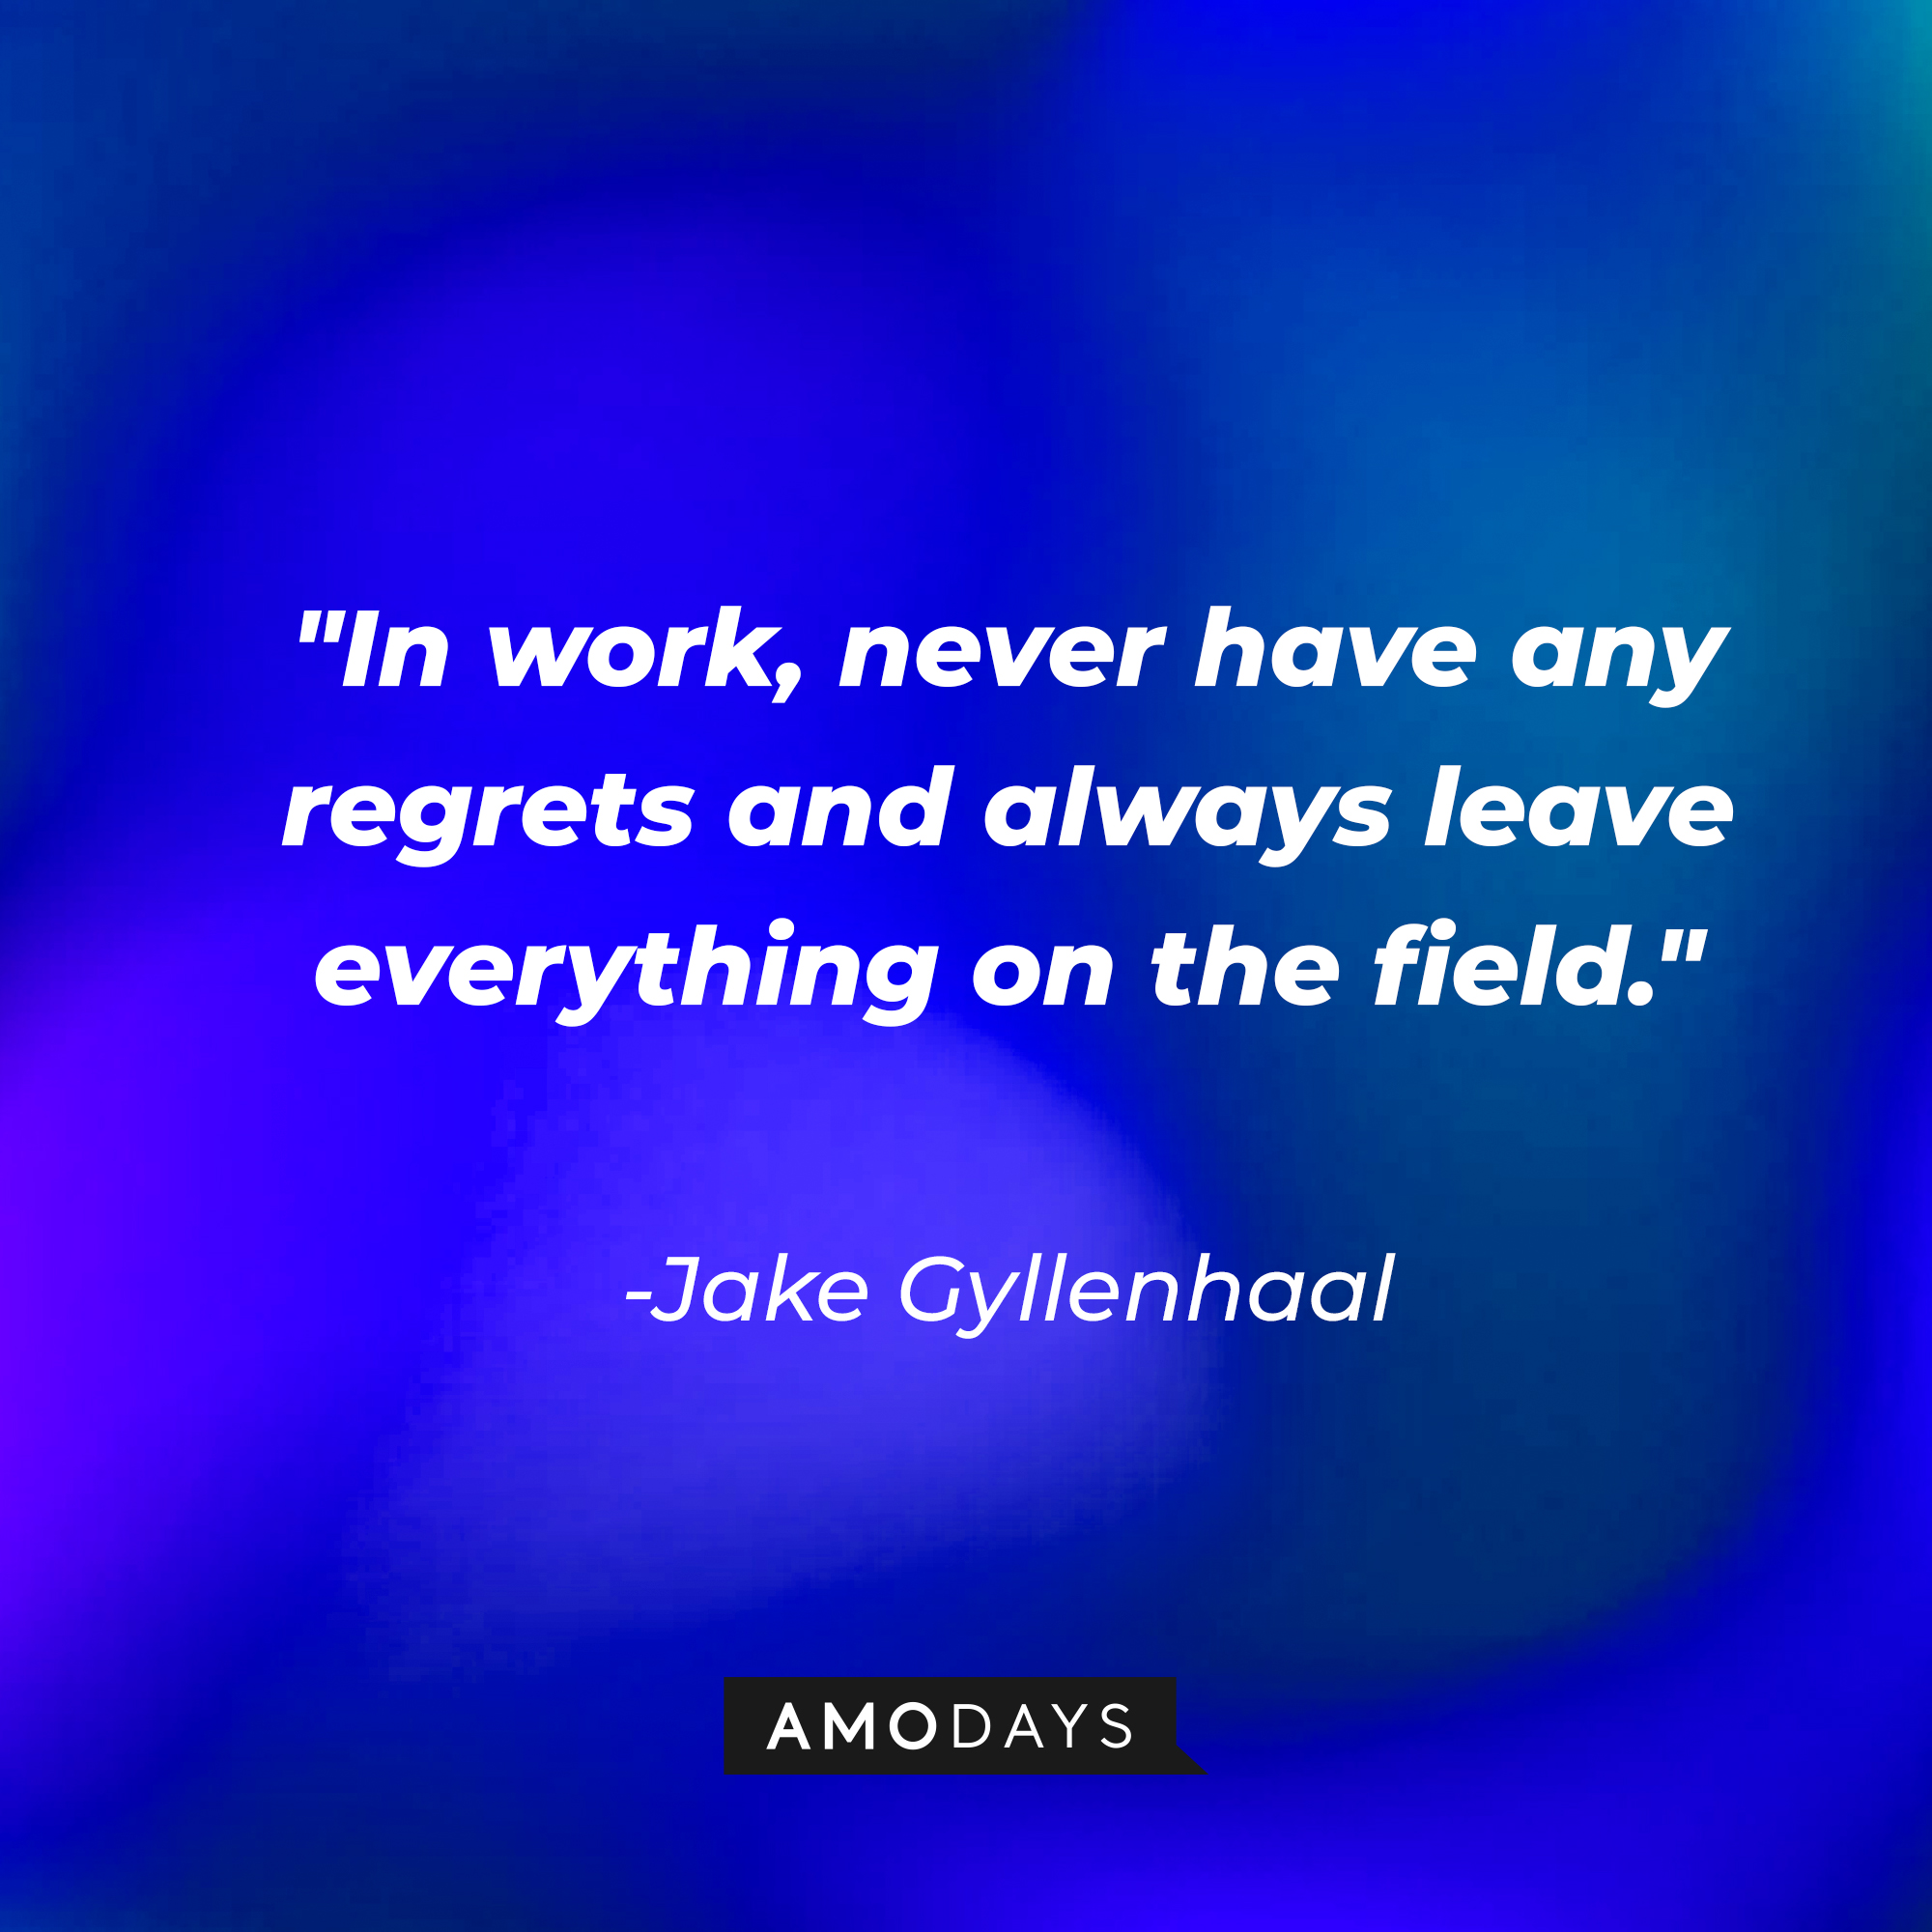 Jake Gyllenhaal's quote: "In work, never have any regrets and always leave everything on the field." | Source: AmoDays